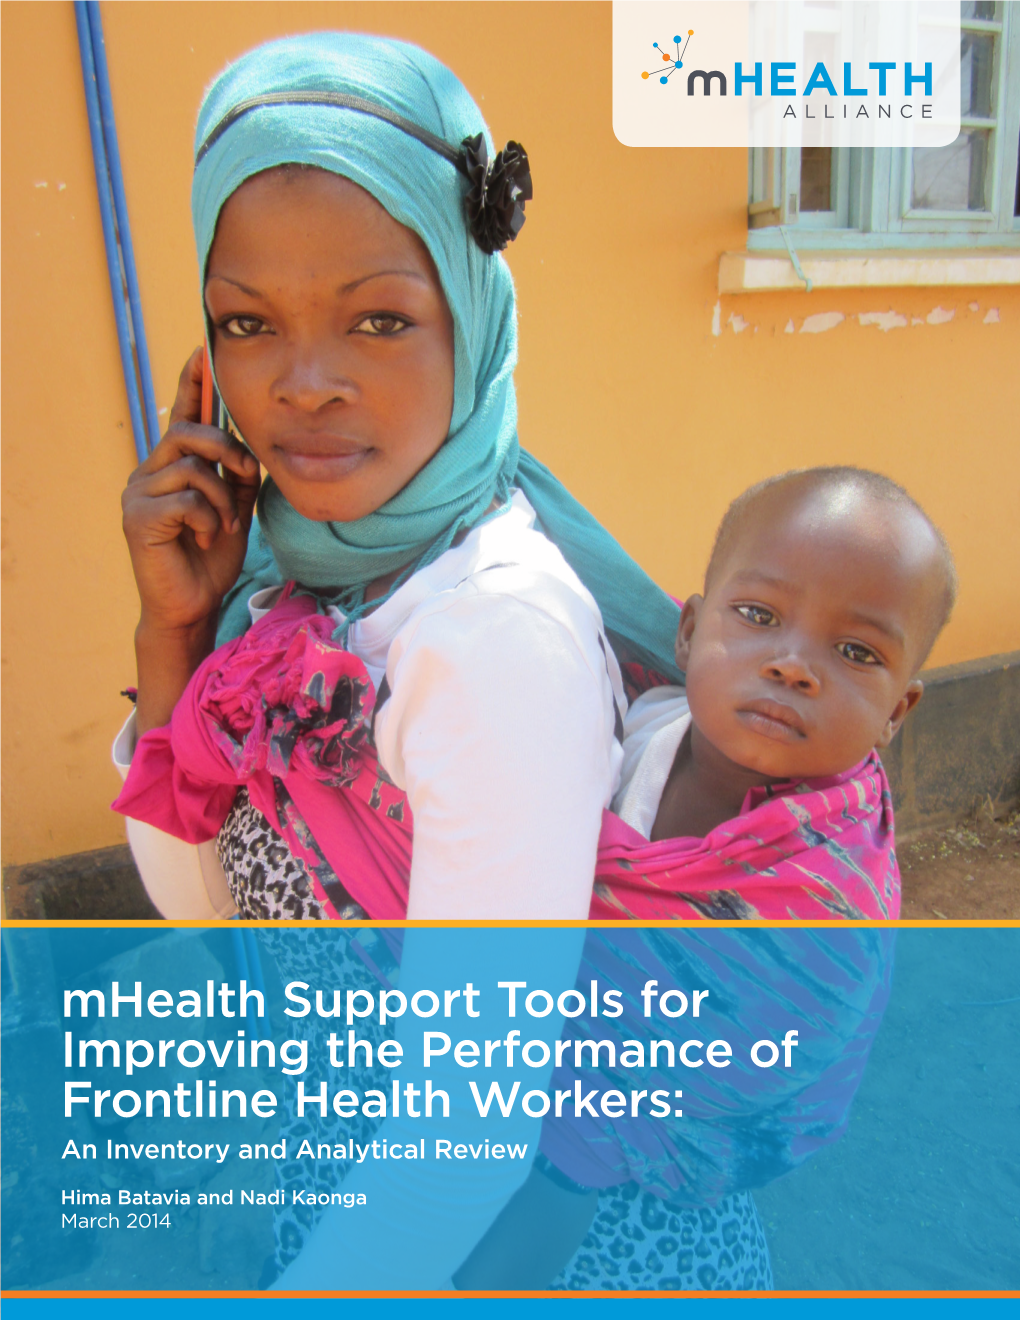 Mhealth Support Tools for Improving the Performance of Frontline Health Workers: an Inventory and Analytical Review